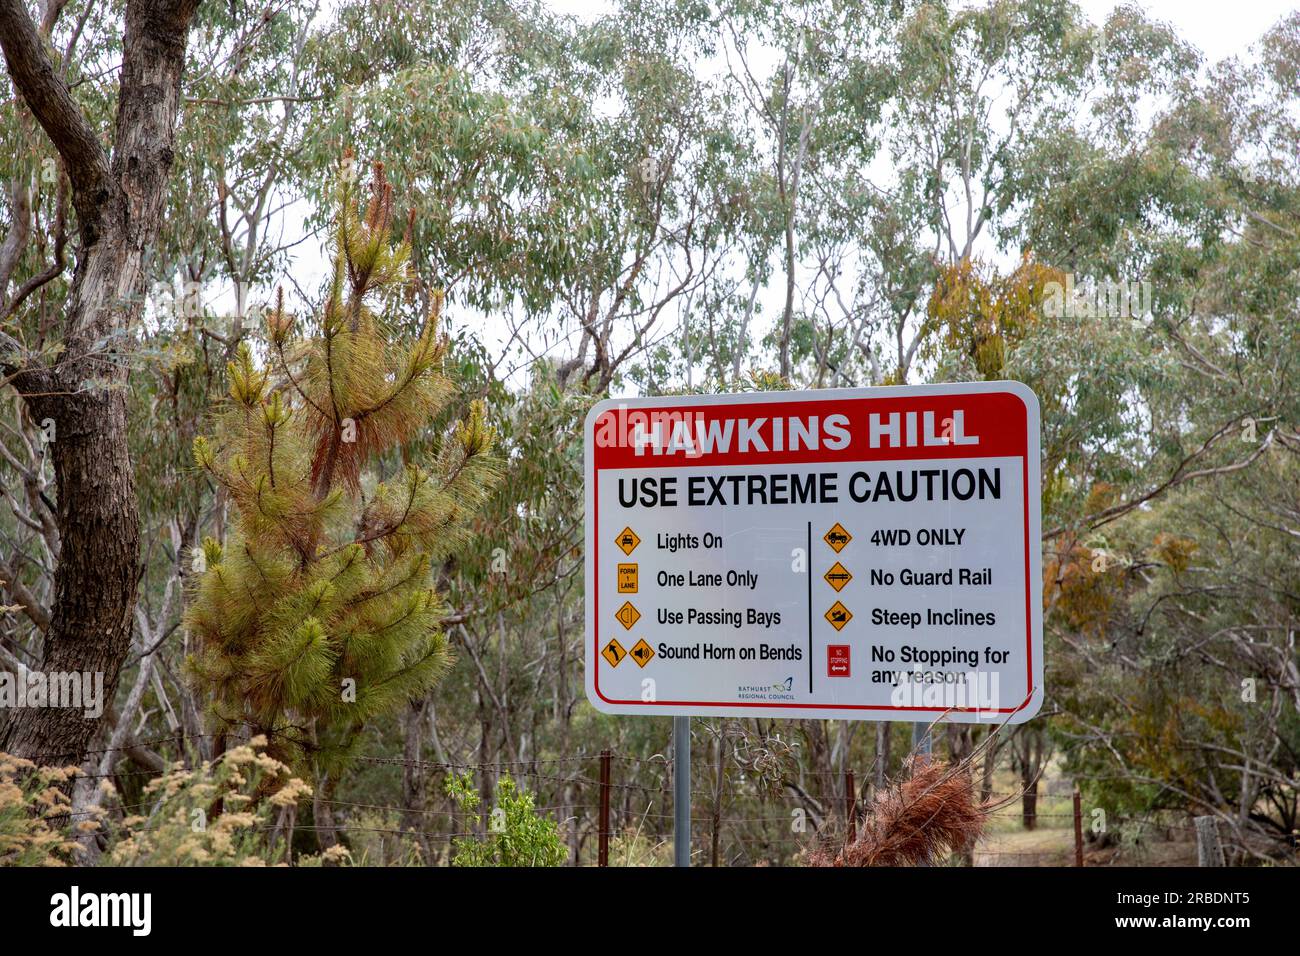 Hawkins Hill on the Hill End Bridle track, warning sign for steep hill, famous as former gold mining project, Hill End,NSW,Australia Stock Photo